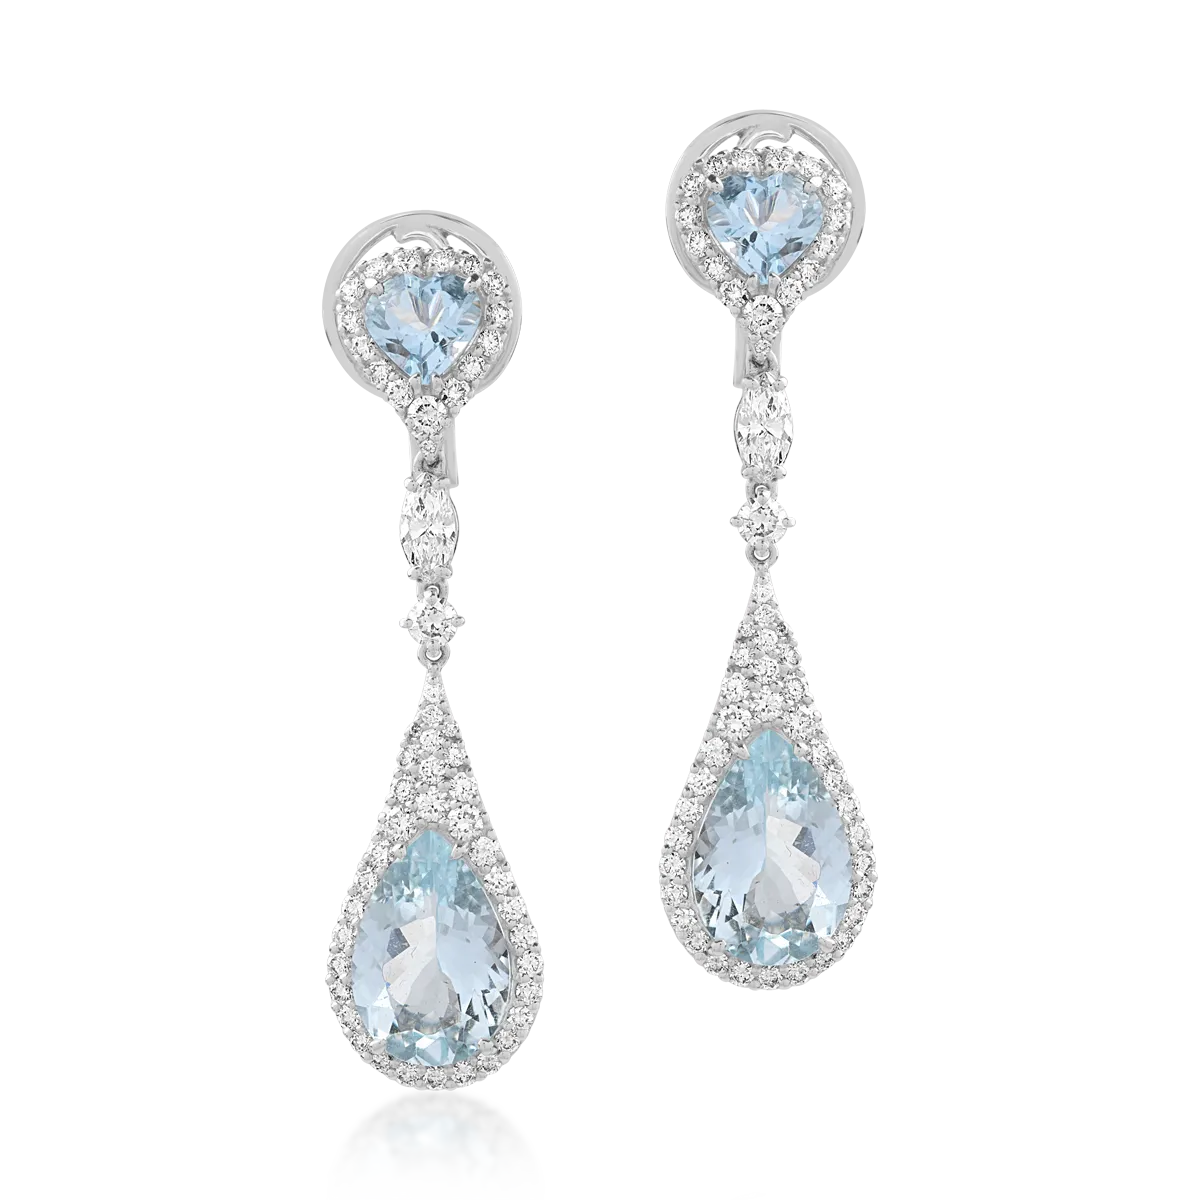 18K white gold earrings with 5.92ct aquamarine and 1.72ct diamonds